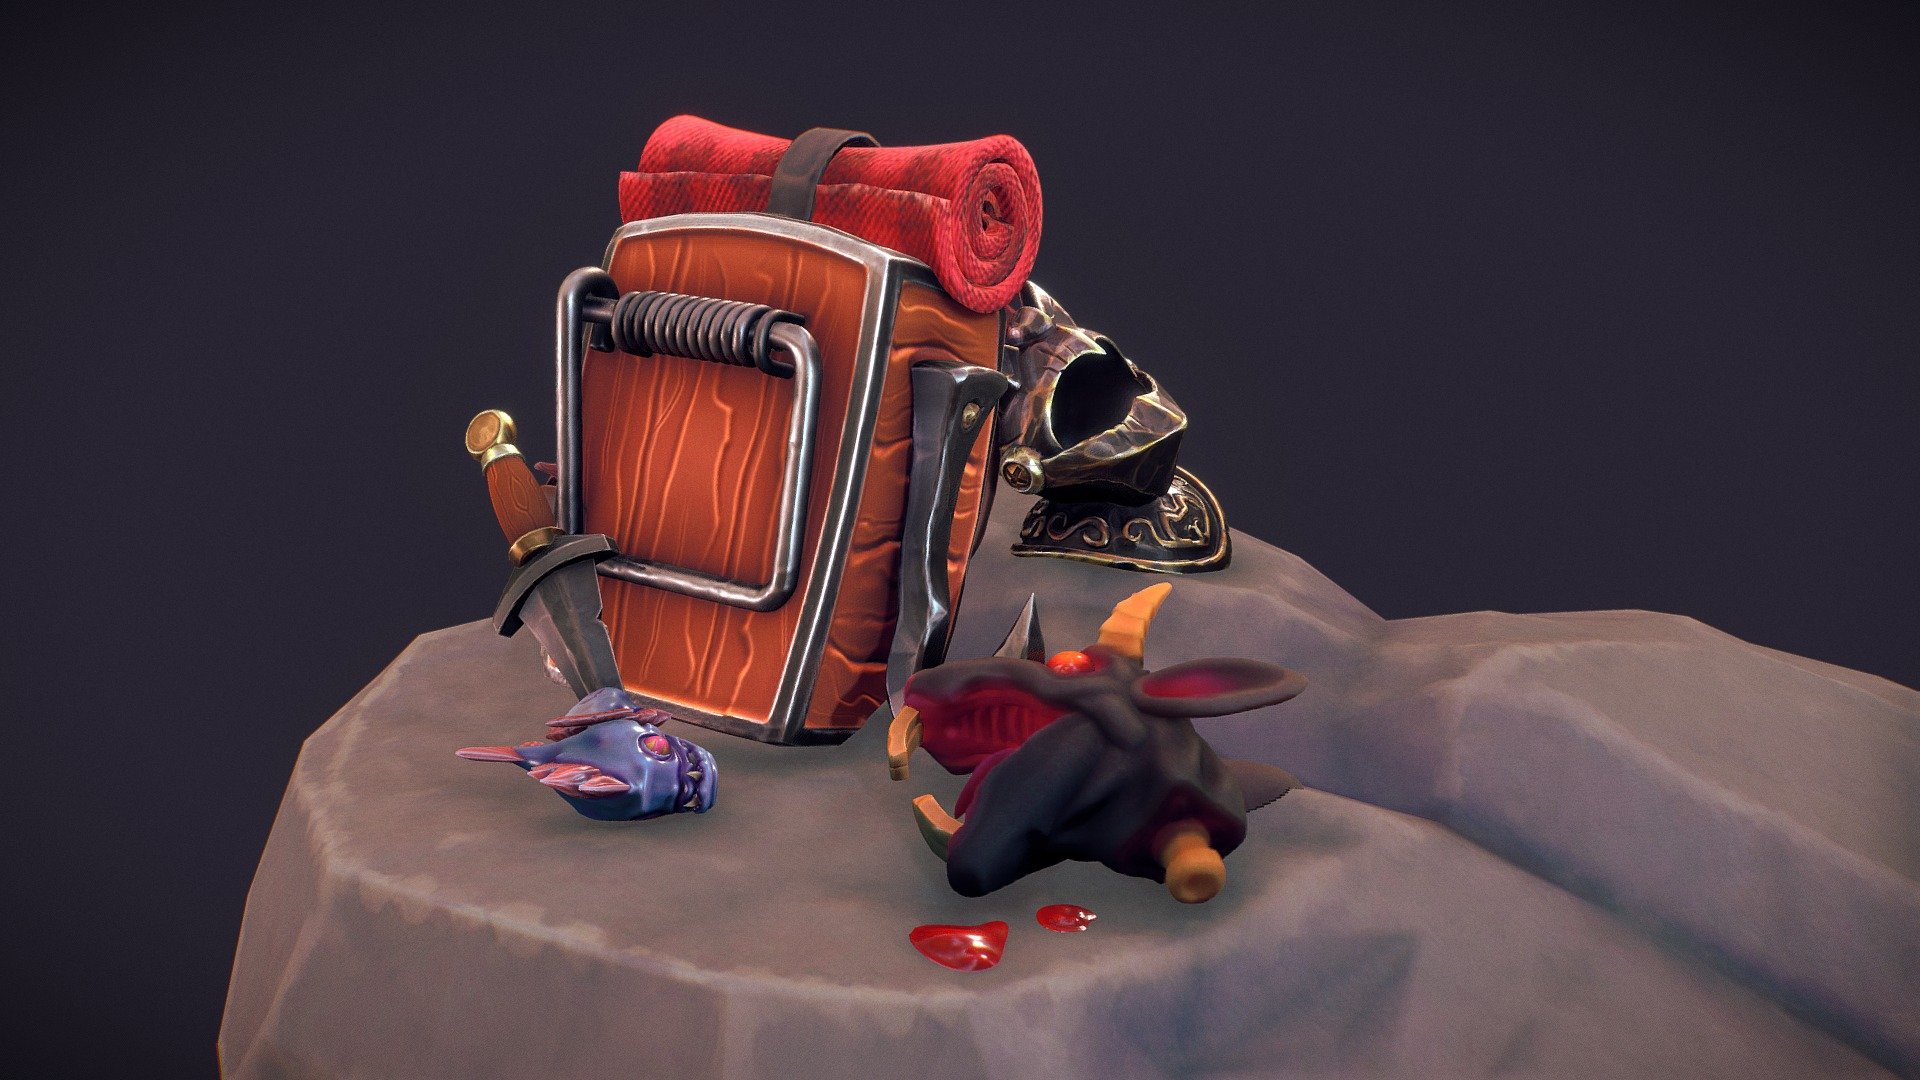 An adventure kit following the adventures of Mittens the rat slayer and his mission to defeat the rat king.
All assets were created by me and designed by me.

Took a while with slow pc and janky tablet, in order to work quick i used zbrush decemation+ uvmaster with  my own created substance smart materials to work fast en get everything out!
hope you enjoy it and may the best adventurer win/survive!

artstation:https://www.artstation.com/crimson-king
instagram; https://www.instagram.com/crimson_king_art/ - The Adventures Of Mittens (Adventure Kit) - 3D model by Julien Lommaert (@Crimson_King) 3d model